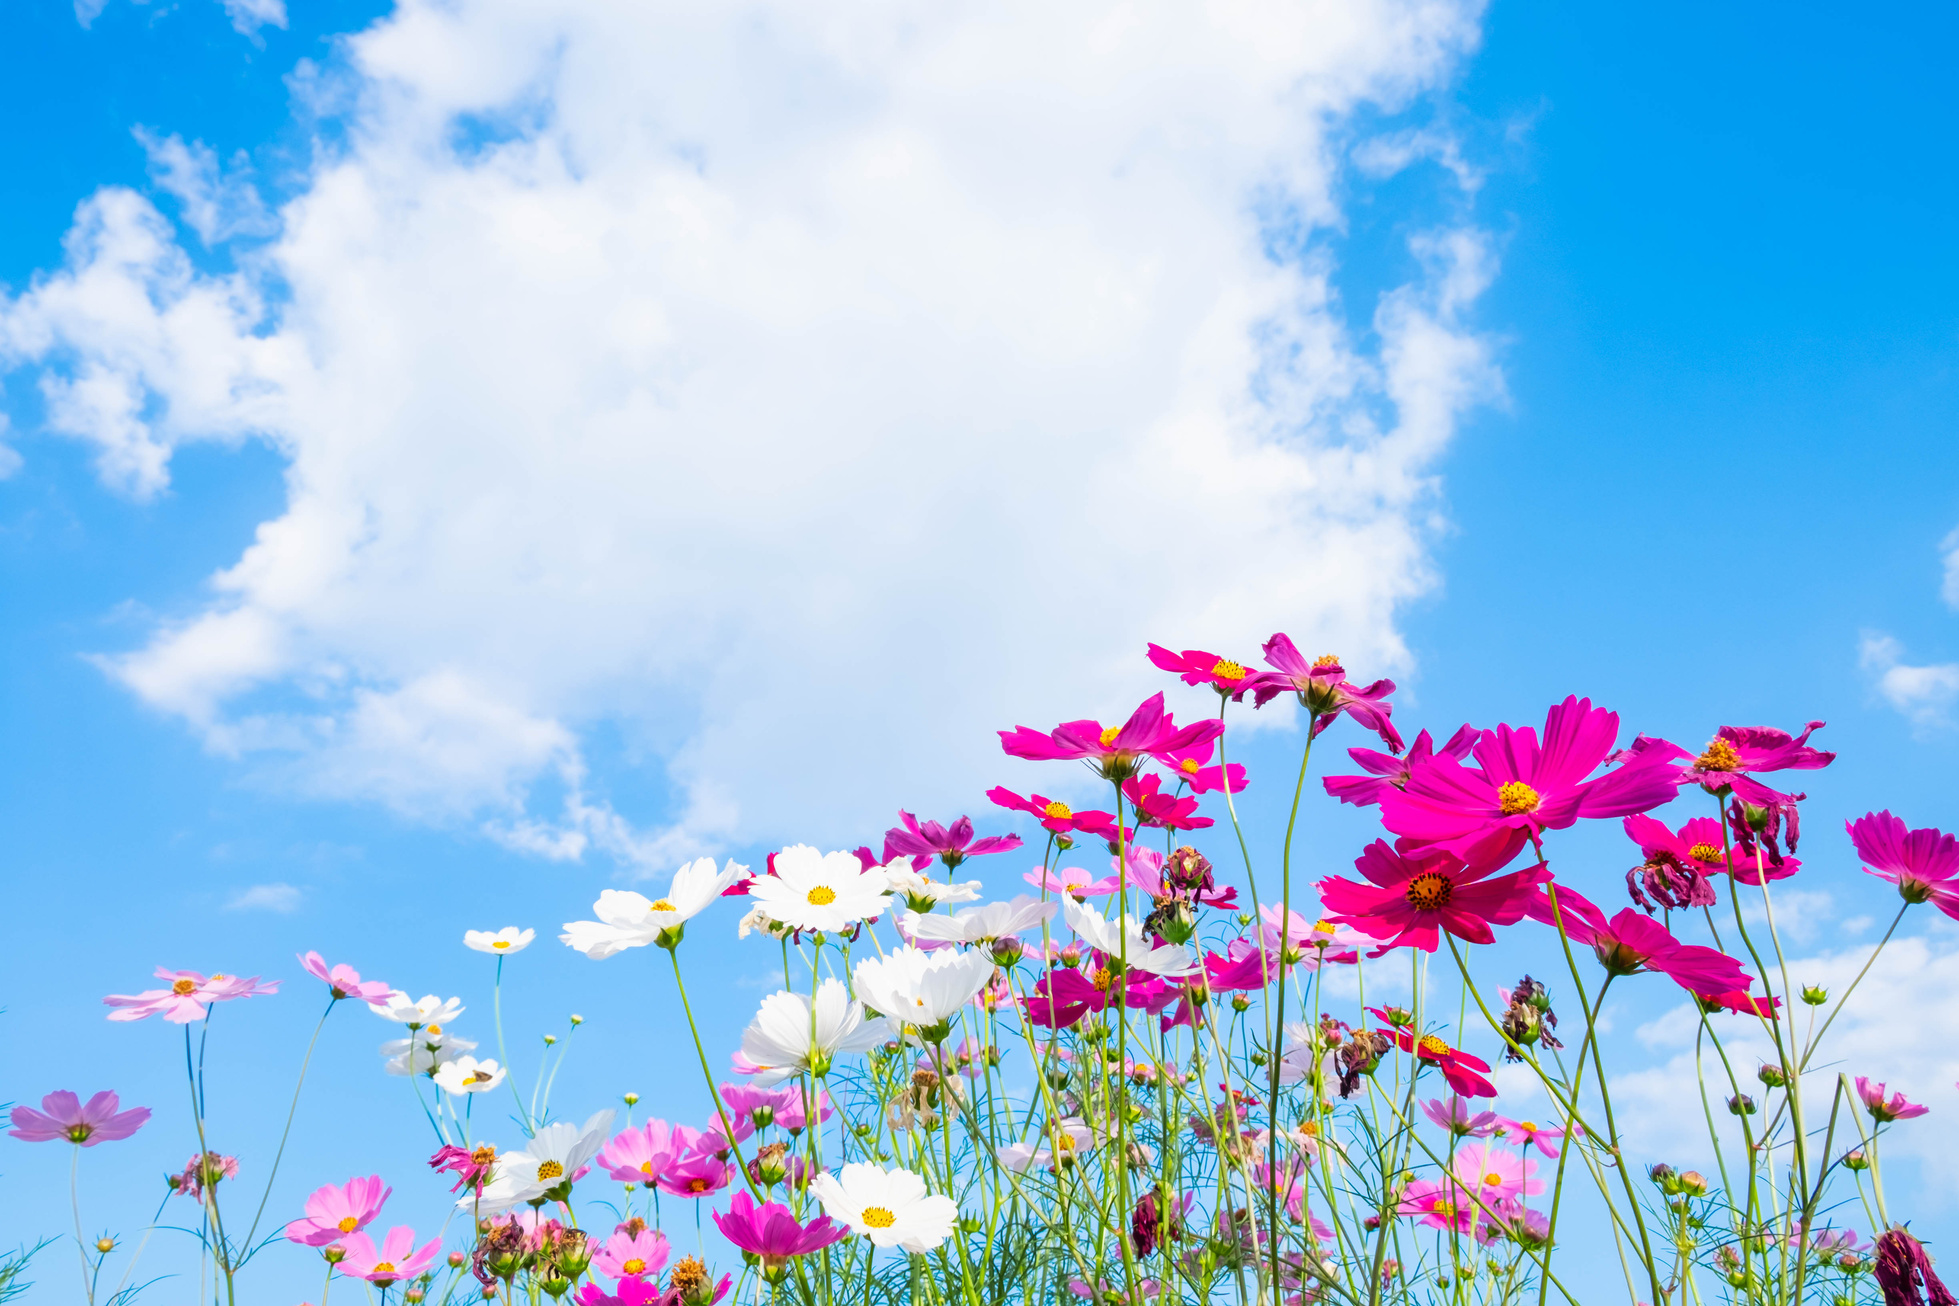 Cosmos Flower and Blue Sky